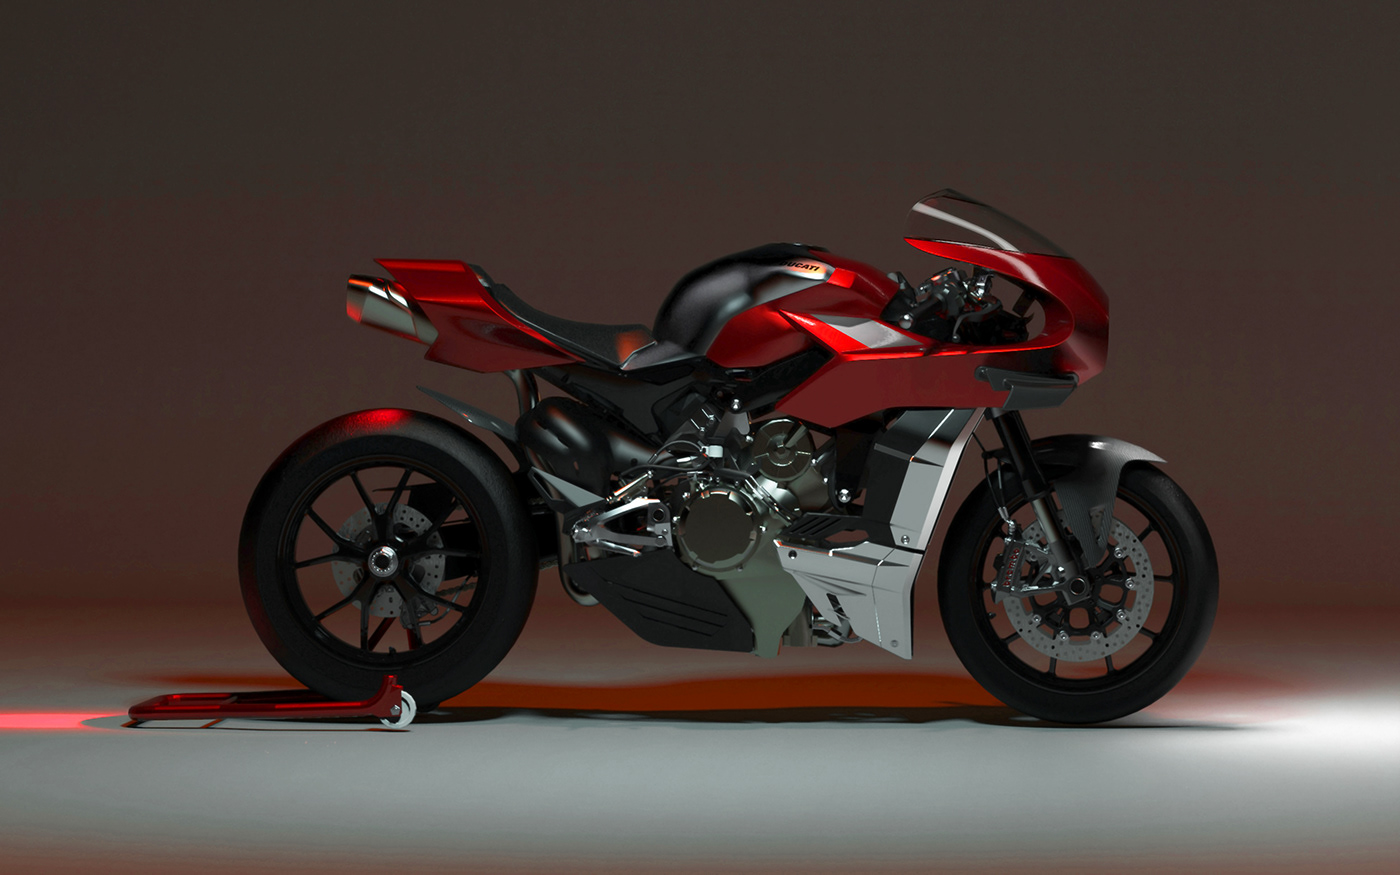 design Ducati ducatidesign ducatimotorcycles MH900 motorcycle panigale rostm Streetfighter v4